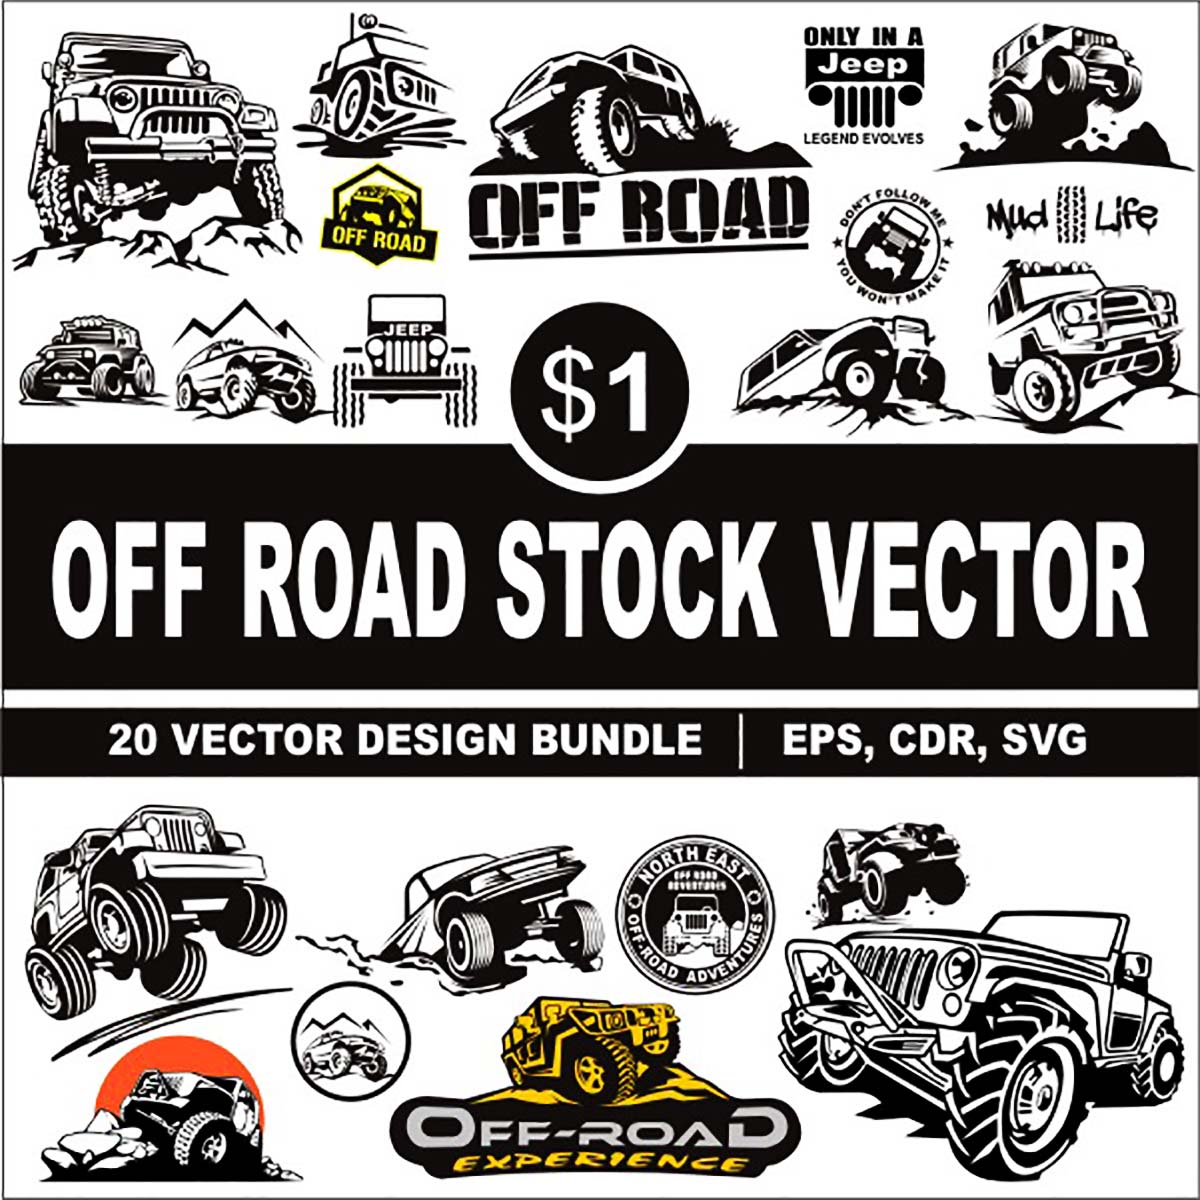 Off Road Truck Stock Vector design illustration preview image.